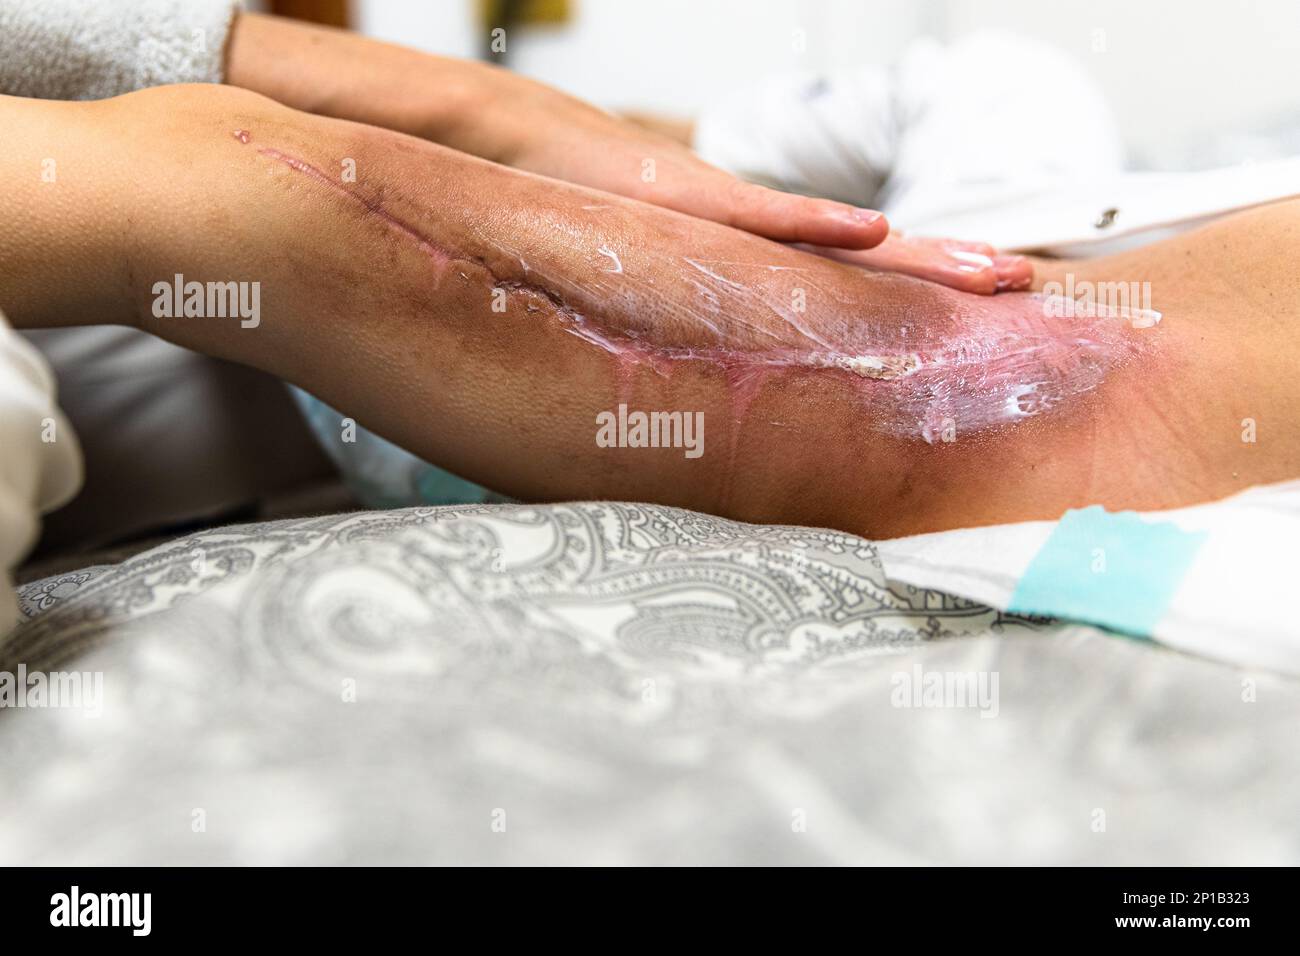 Cream treatment after radiotherapy with foot surgery in the treatment of alveolar rhabdomyosarcoma cancer Stock Photo